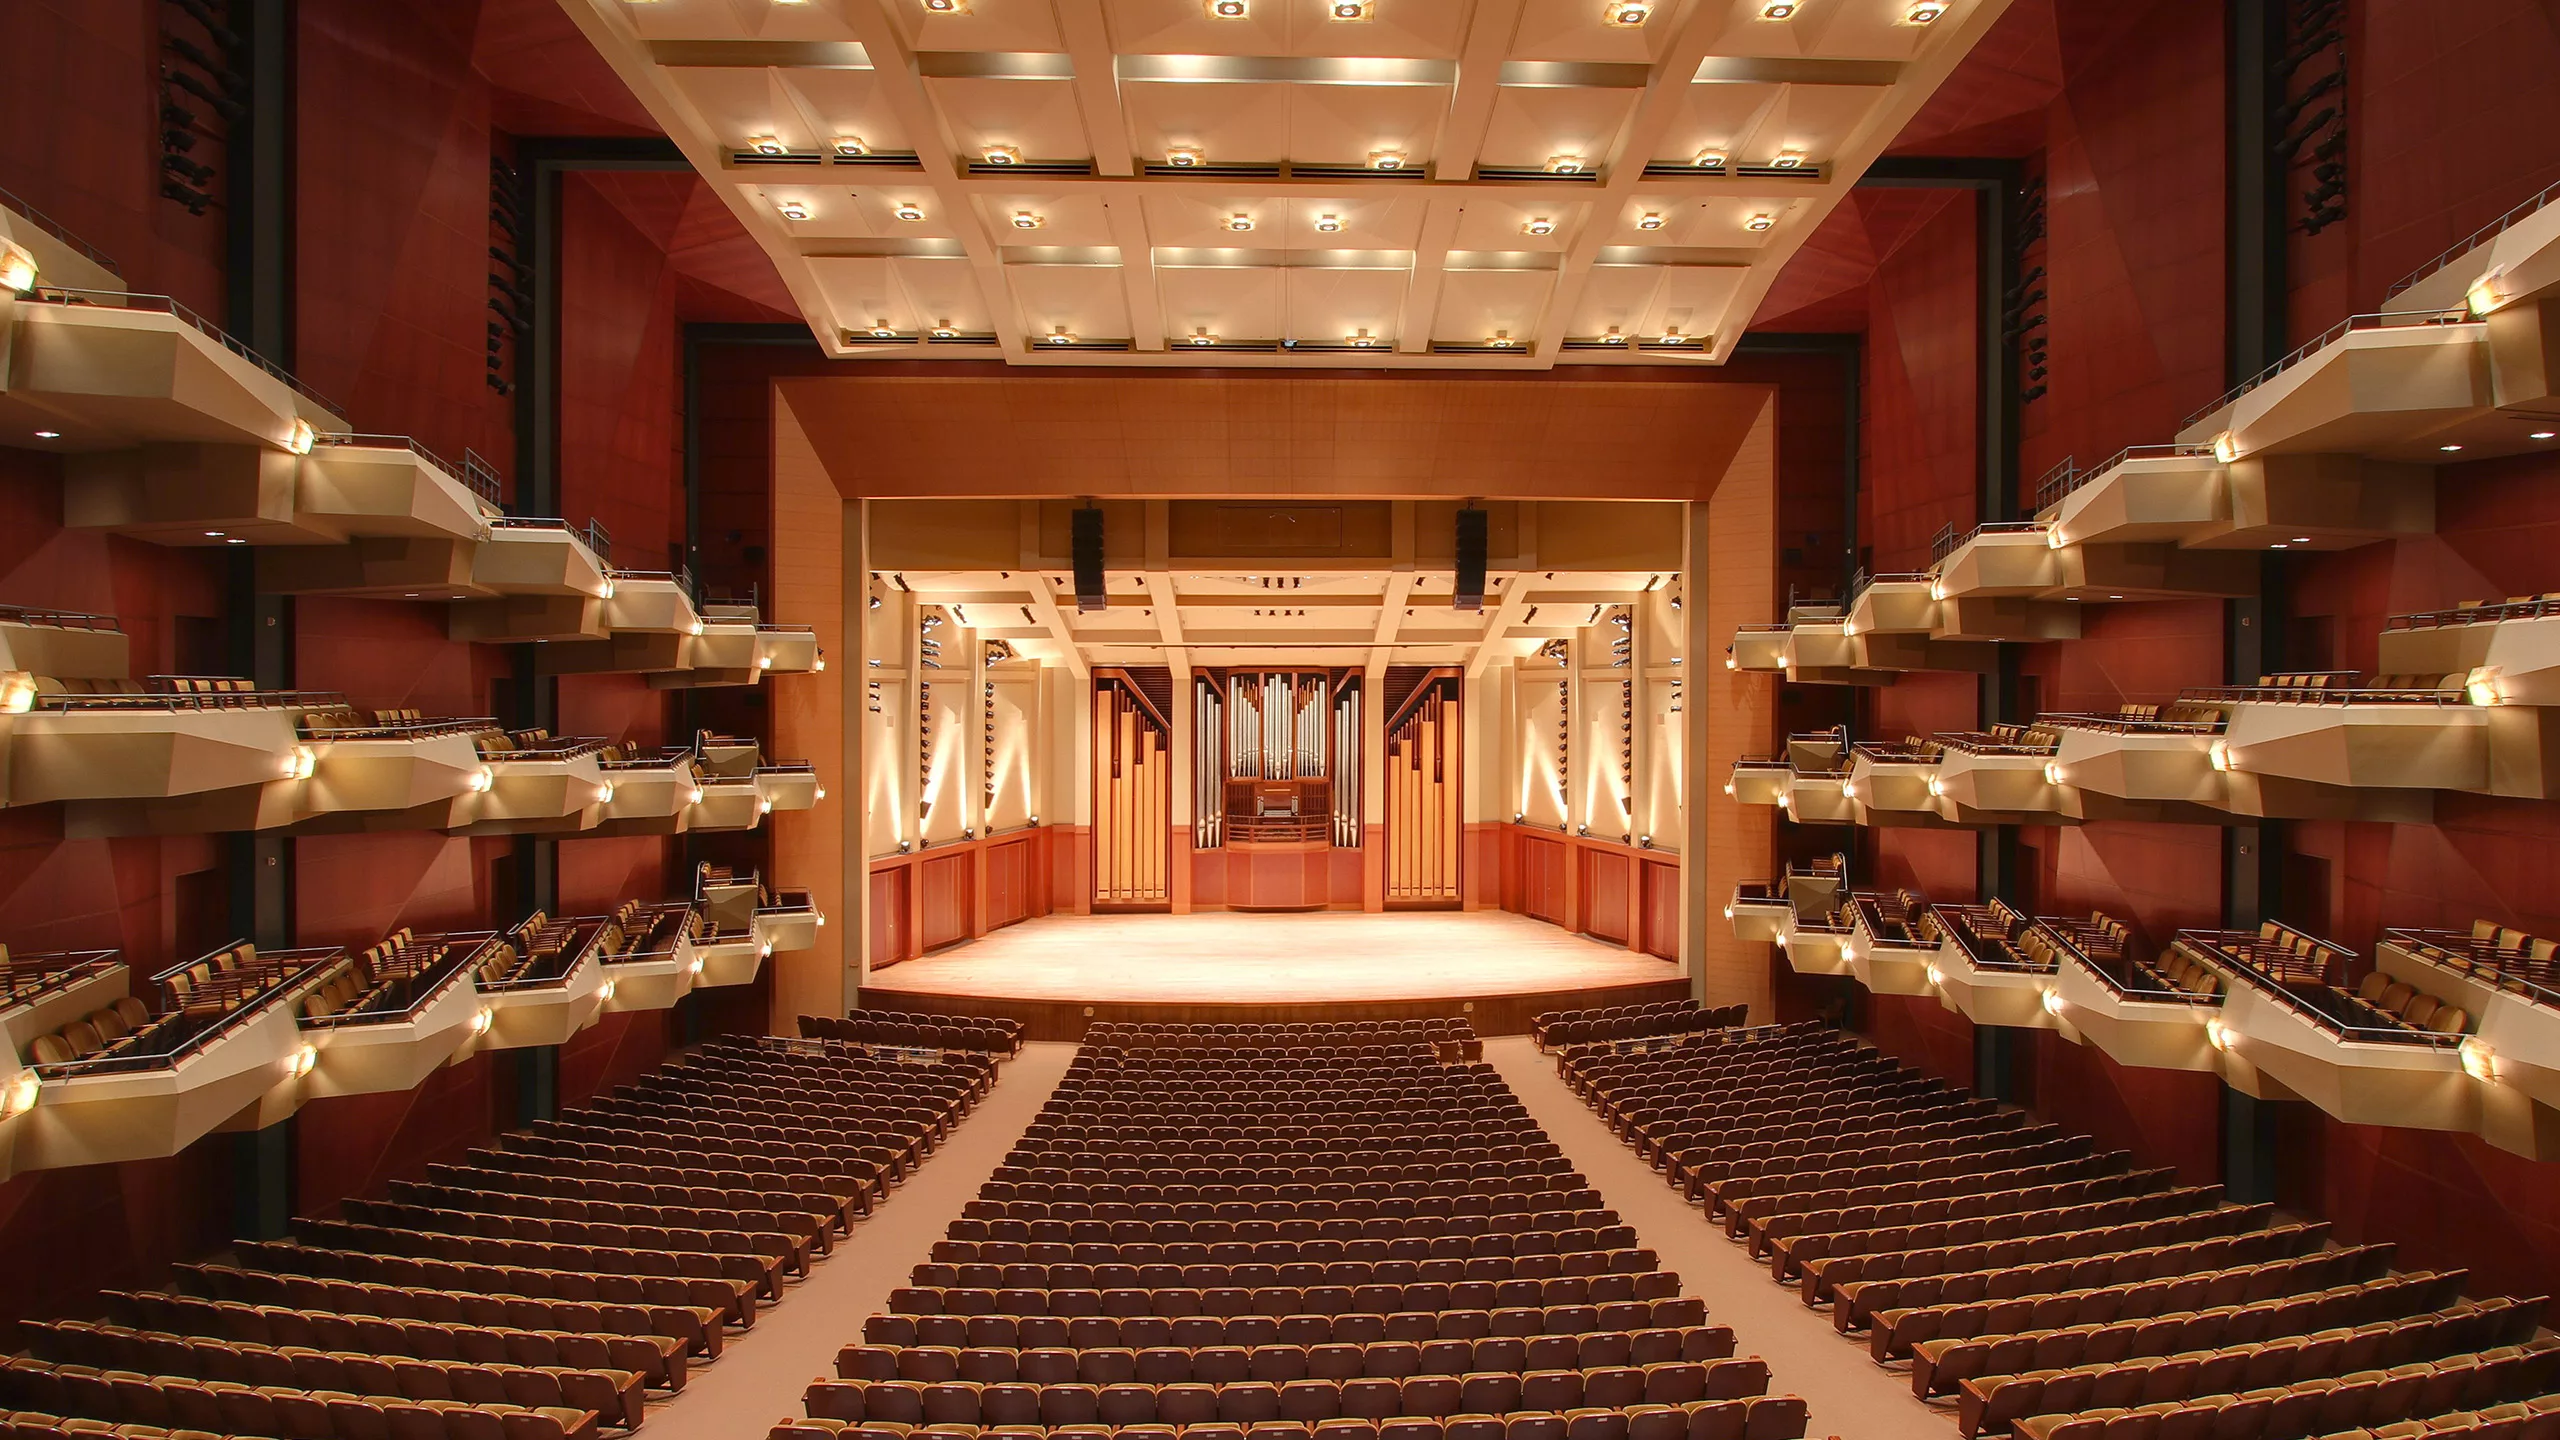 Interior view of Benaroya Hall's main hall, floor seating, balconies, and central stage